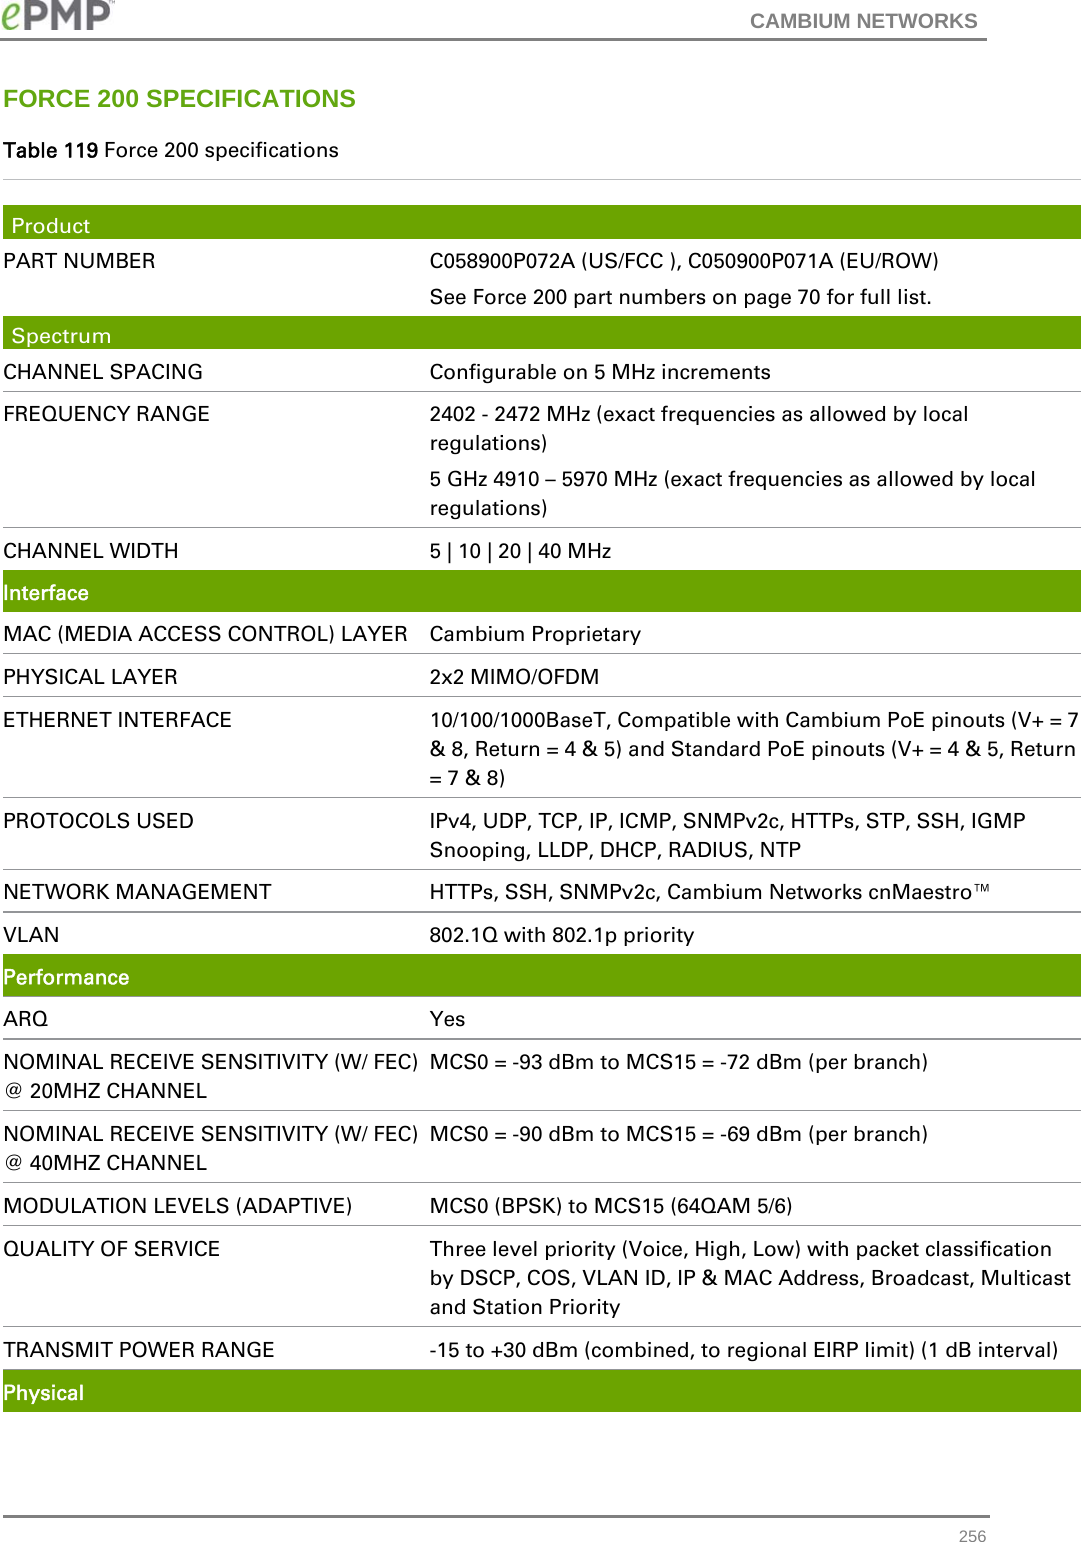 CAMBIUM NETWORKS   256FORCE 200 SPECIFICATIONS Table 119 Force 200 specifications  Product PART NUMBER  C058900P072A (US/FCC ), C050900P071A (EU/ROW) See Force 200 part numbers on page 70 for full list. Spectrum CHANNEL SPACING  Configurable on 5 MHz increments FREQUENCY RANGE  2402 - 2472 MHz (exact frequencies as allowed by local regulations) 5 GHz 4910 – 5970 MHz (exact frequencies as allowed by local regulations)   CHANNEL WIDTH  5 | 10 | 20 | 40 MHz   Interface MAC (MEDIA ACCESS CONTROL) LAYER  Cambium Proprietary PHYSICAL LAYER  2x2 MIMO/OFDM ETHERNET INTERFACE  10/100/1000BaseT, Compatible with Cambium PoE pinouts (V+ = 7 &amp; 8, Return = 4 &amp; 5) and Standard PoE pinouts (V+ = 4 &amp; 5, Return = 7 &amp; 8) PROTOCOLS USED  IPv4, UDP, TCP, IP, ICMP, SNMPv2c, HTTPs, STP, SSH, IGMP Snooping, LLDP, DHCP, RADIUS, NTP  NETWORK MANAGEMENT  HTTPs, SSH, SNMPv2c, Cambium Networks cnMaestro™ VLAN  802.1Q with 802.1p priority Performance ARQ Yes NOMINAL RECEIVE SENSITIVITY (W/ FEC) @ 20MHZ CHANNEL MCS0 = -93 dBm to MCS15 = -72 dBm (per branch) NOMINAL RECEIVE SENSITIVITY (W/ FEC) @ 40MHZ CHANNEL MCS0 = -90 dBm to MCS15 = -69 dBm (per branch) MODULATION LEVELS (ADAPTIVE)  MCS0 (BPSK) to MCS15 (64QAM 5/6) QUALITY OF SERVICE  Three level priority (Voice, High, Low) with packet classification by DSCP, COS, VLAN ID, IP &amp; MAC Address, Broadcast, Multicast and Station Priority TRANSMIT POWER RANGE  -15 to +30 dBm (combined, to regional EIRP limit) (1 dB interval) Physical 